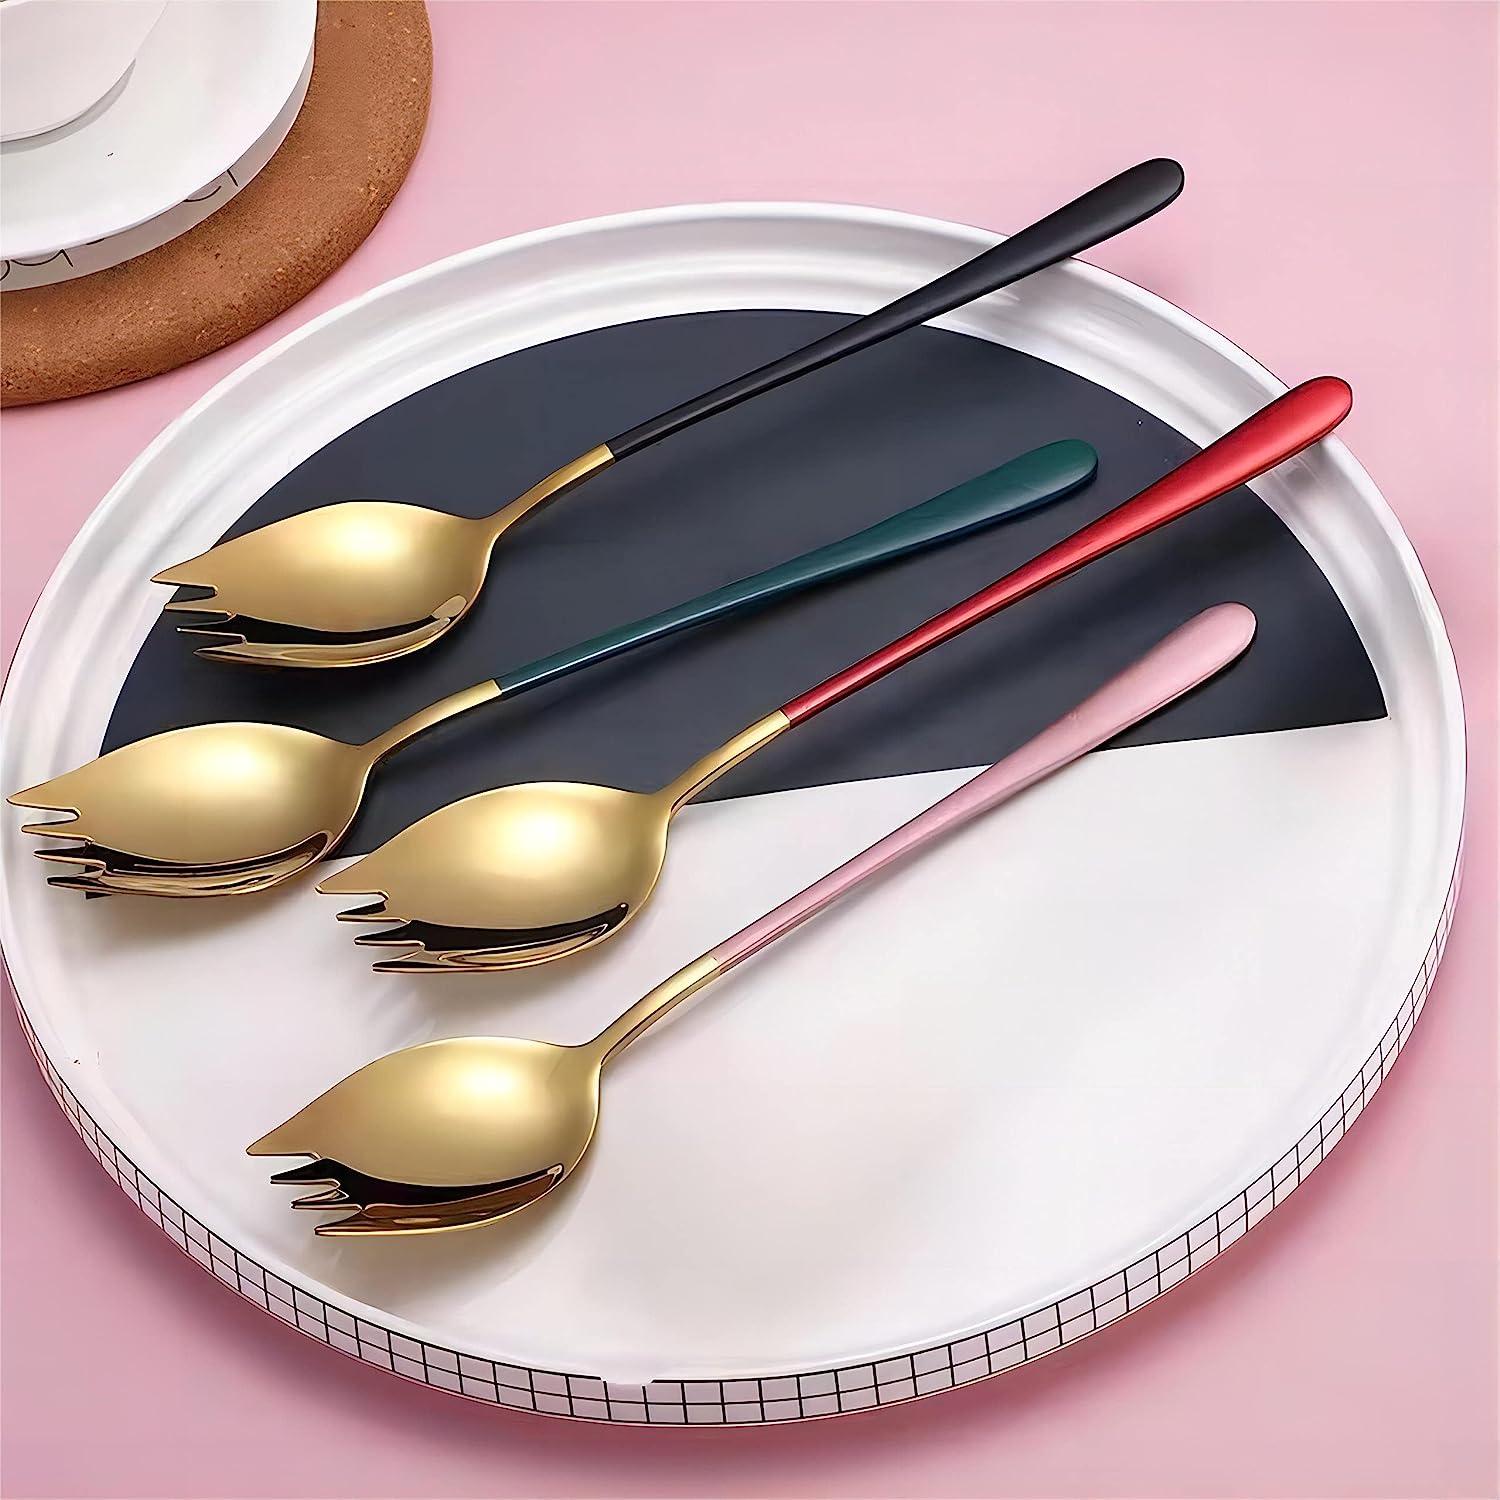 4pcs/set Stainless Steel Gold-plated Cutlery, Including Long